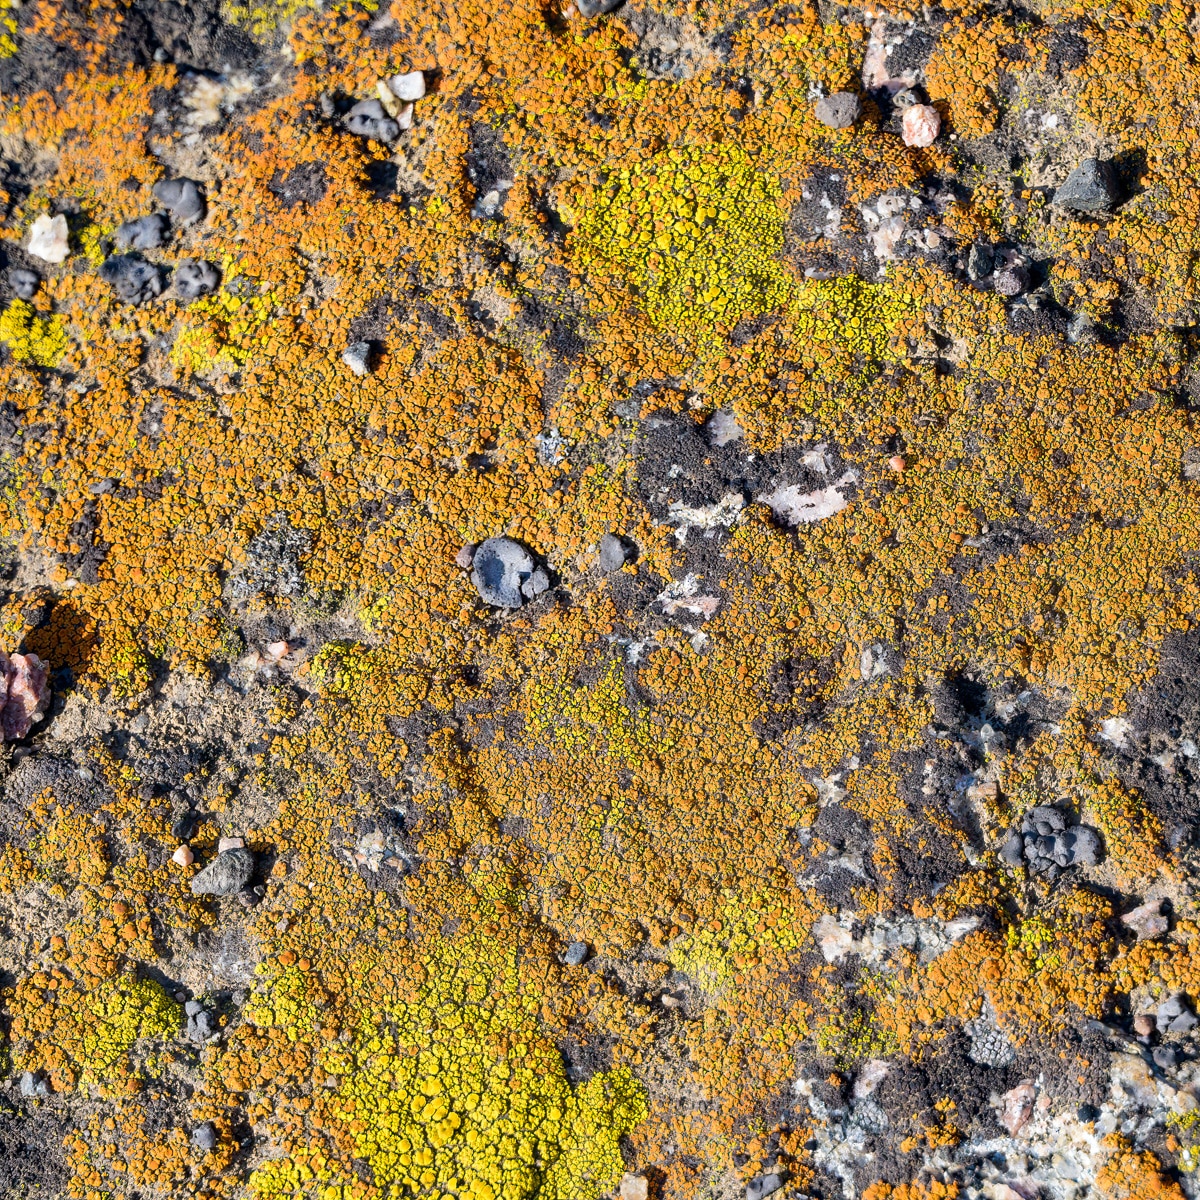 Close-up of common orange lichen growing on a rock along the Chief Joseph Scenic Byway near Cody, Wyoming.